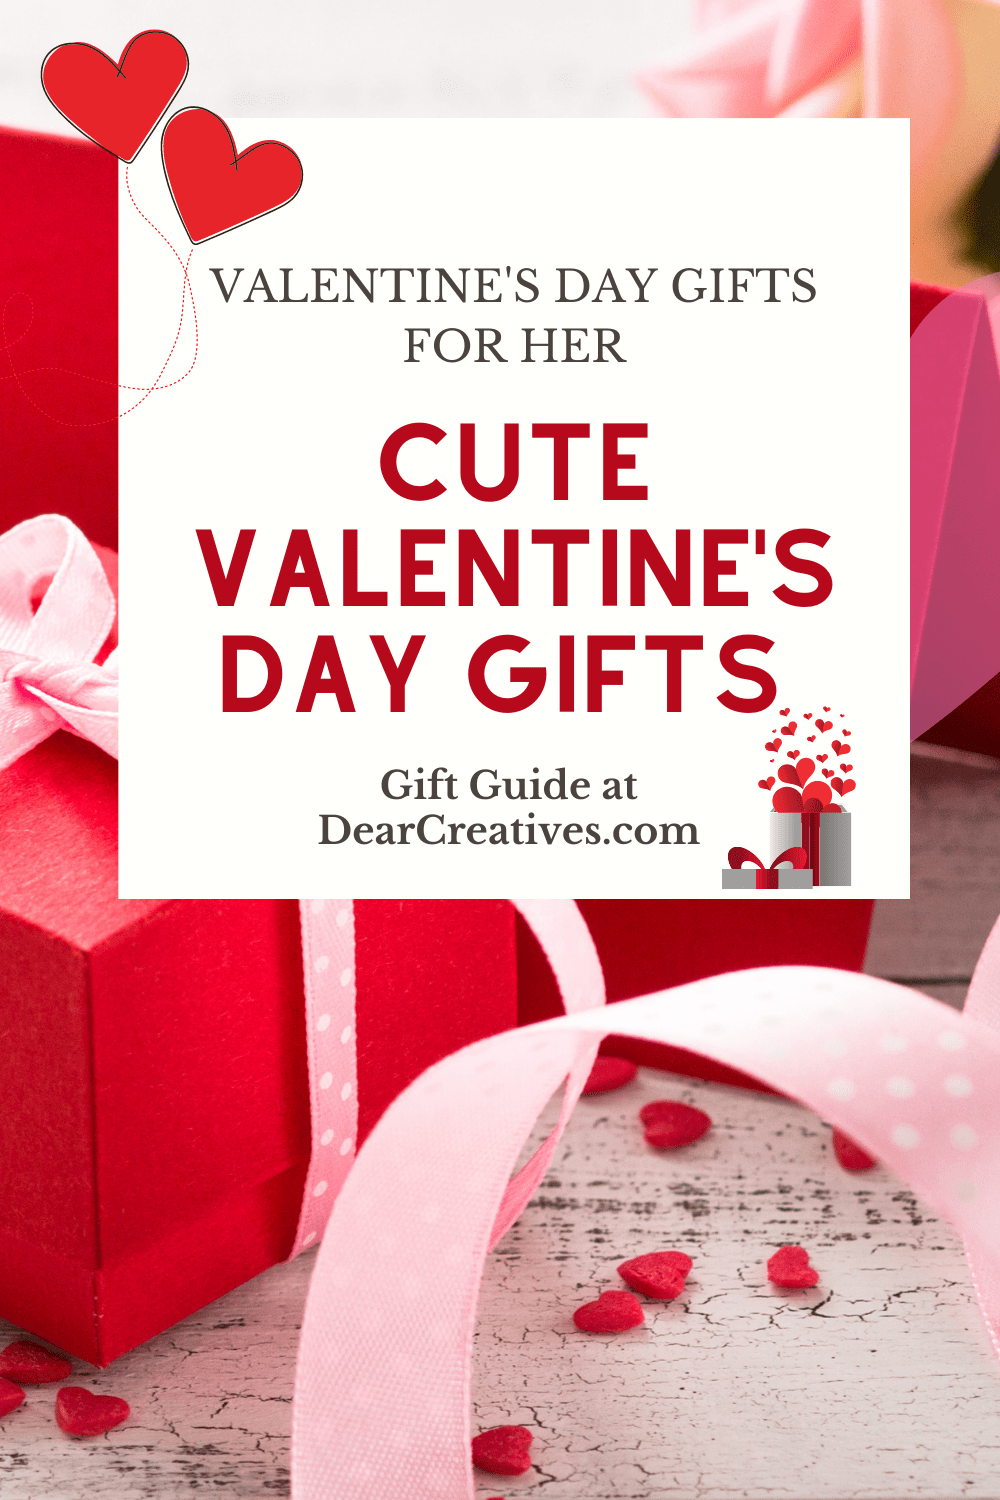 Cute Valentine’s Day Gifts